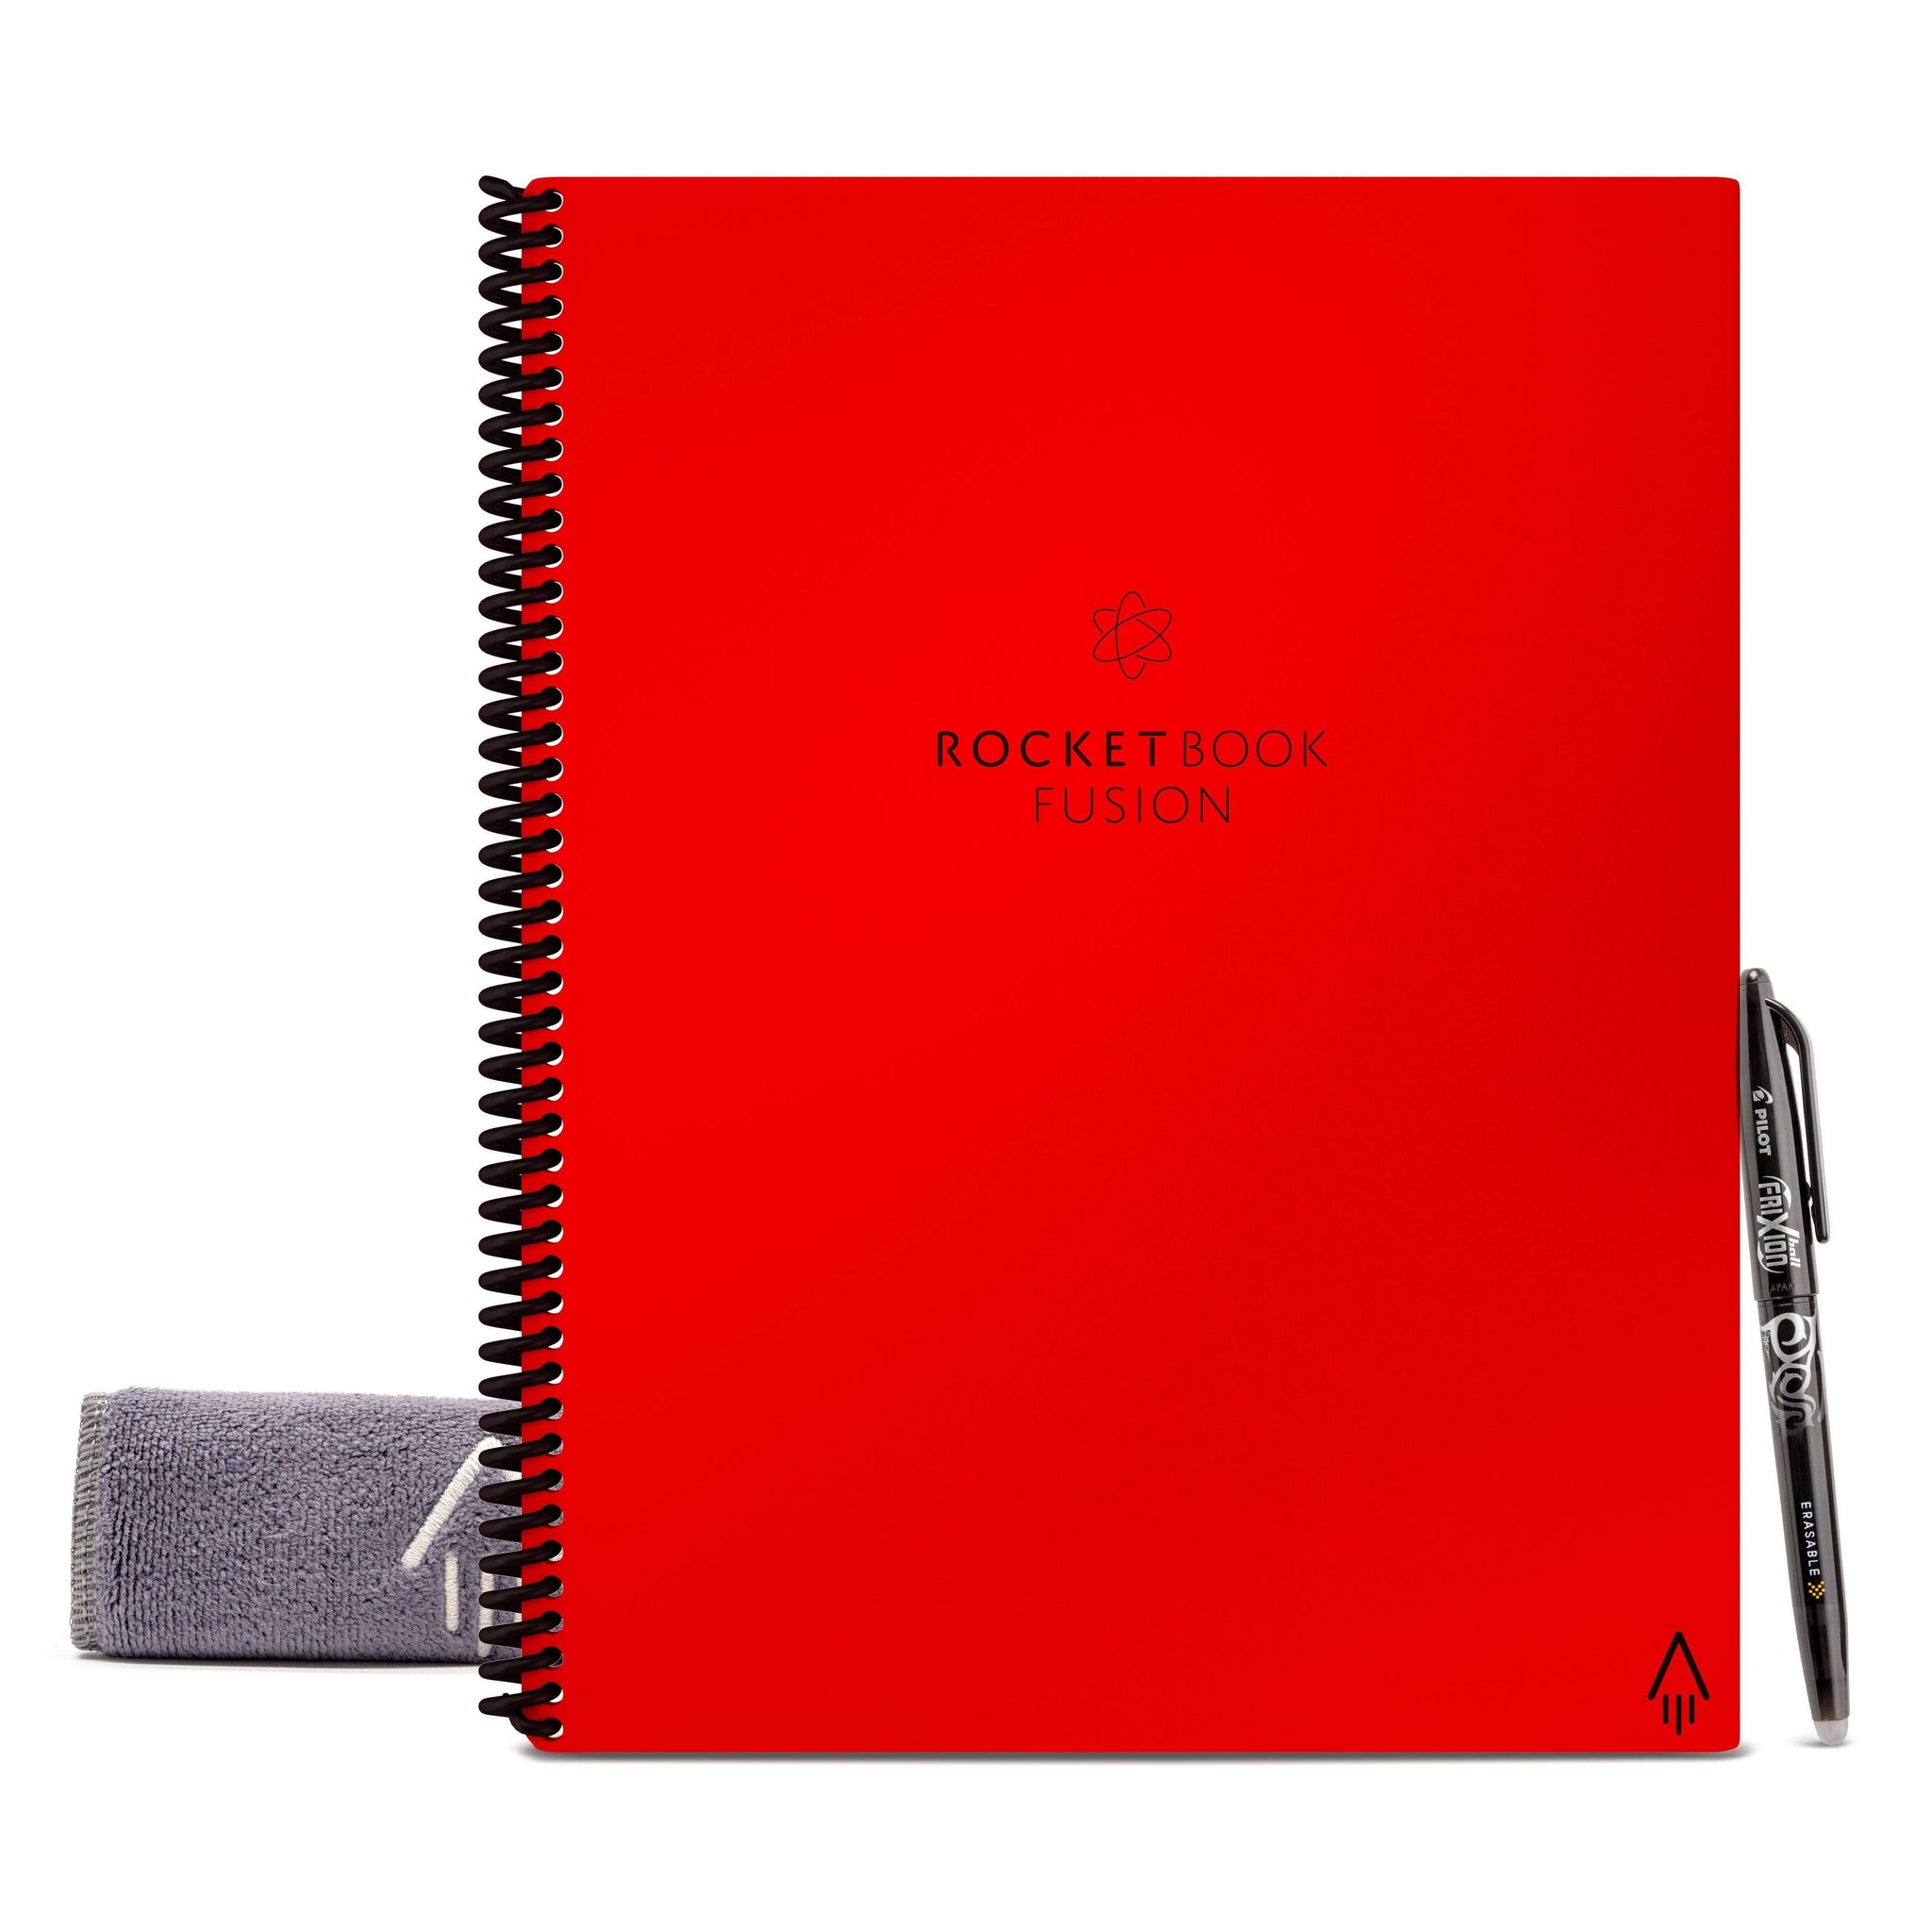 Rocketbook Fusion Review: Adding Structure To The Hybrid Notebook